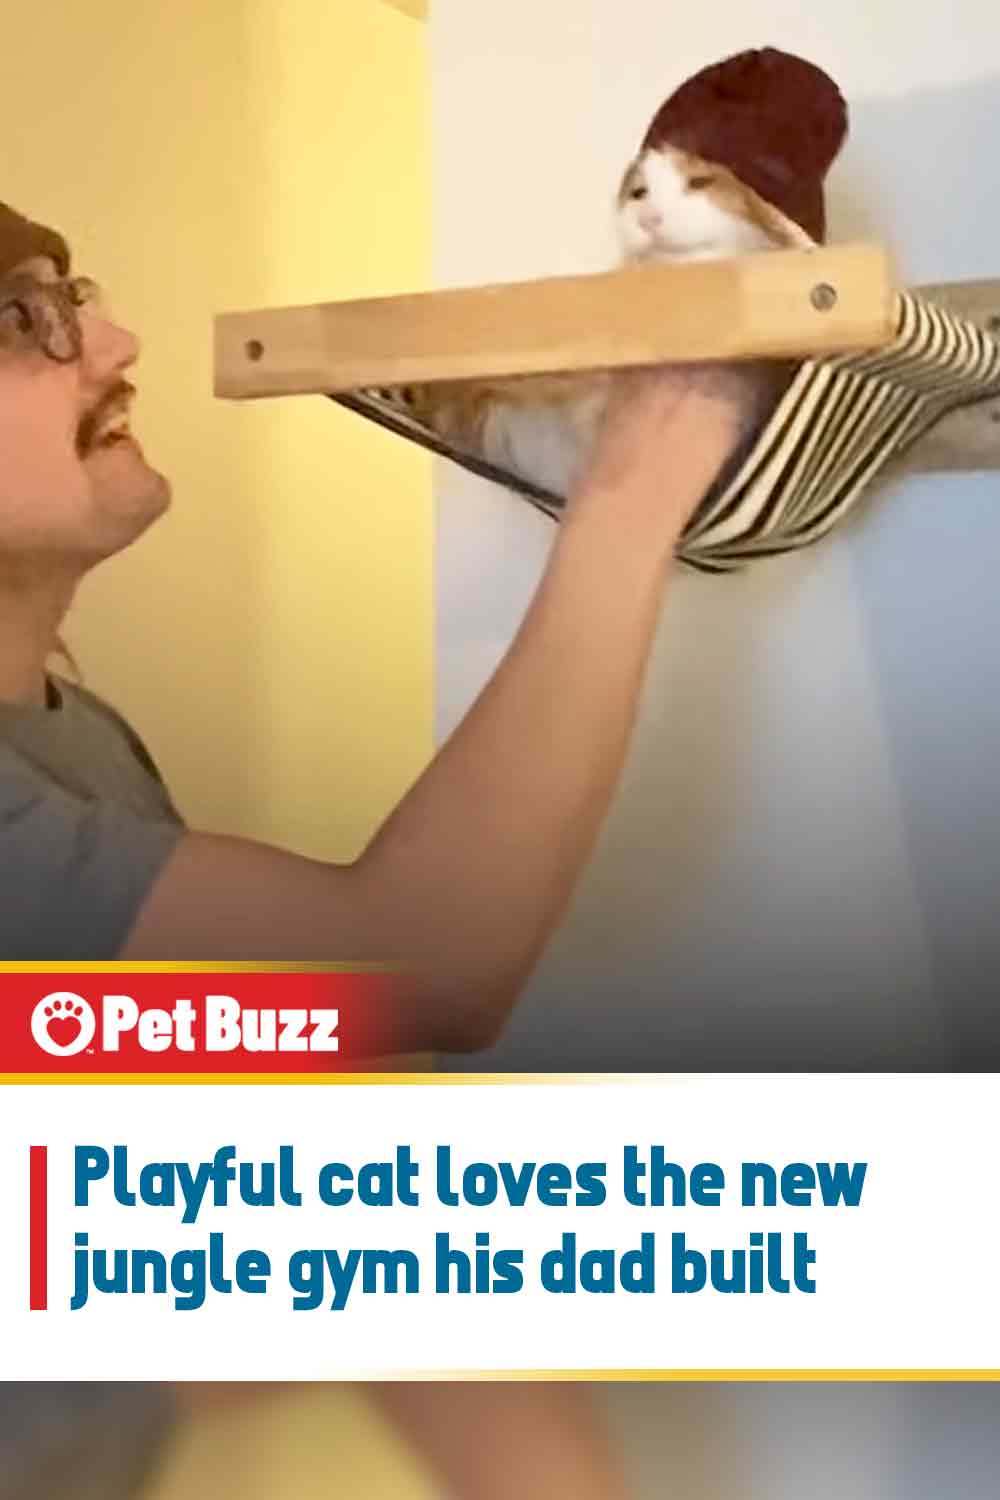 Playful cat loves the new jungle gym his dad built